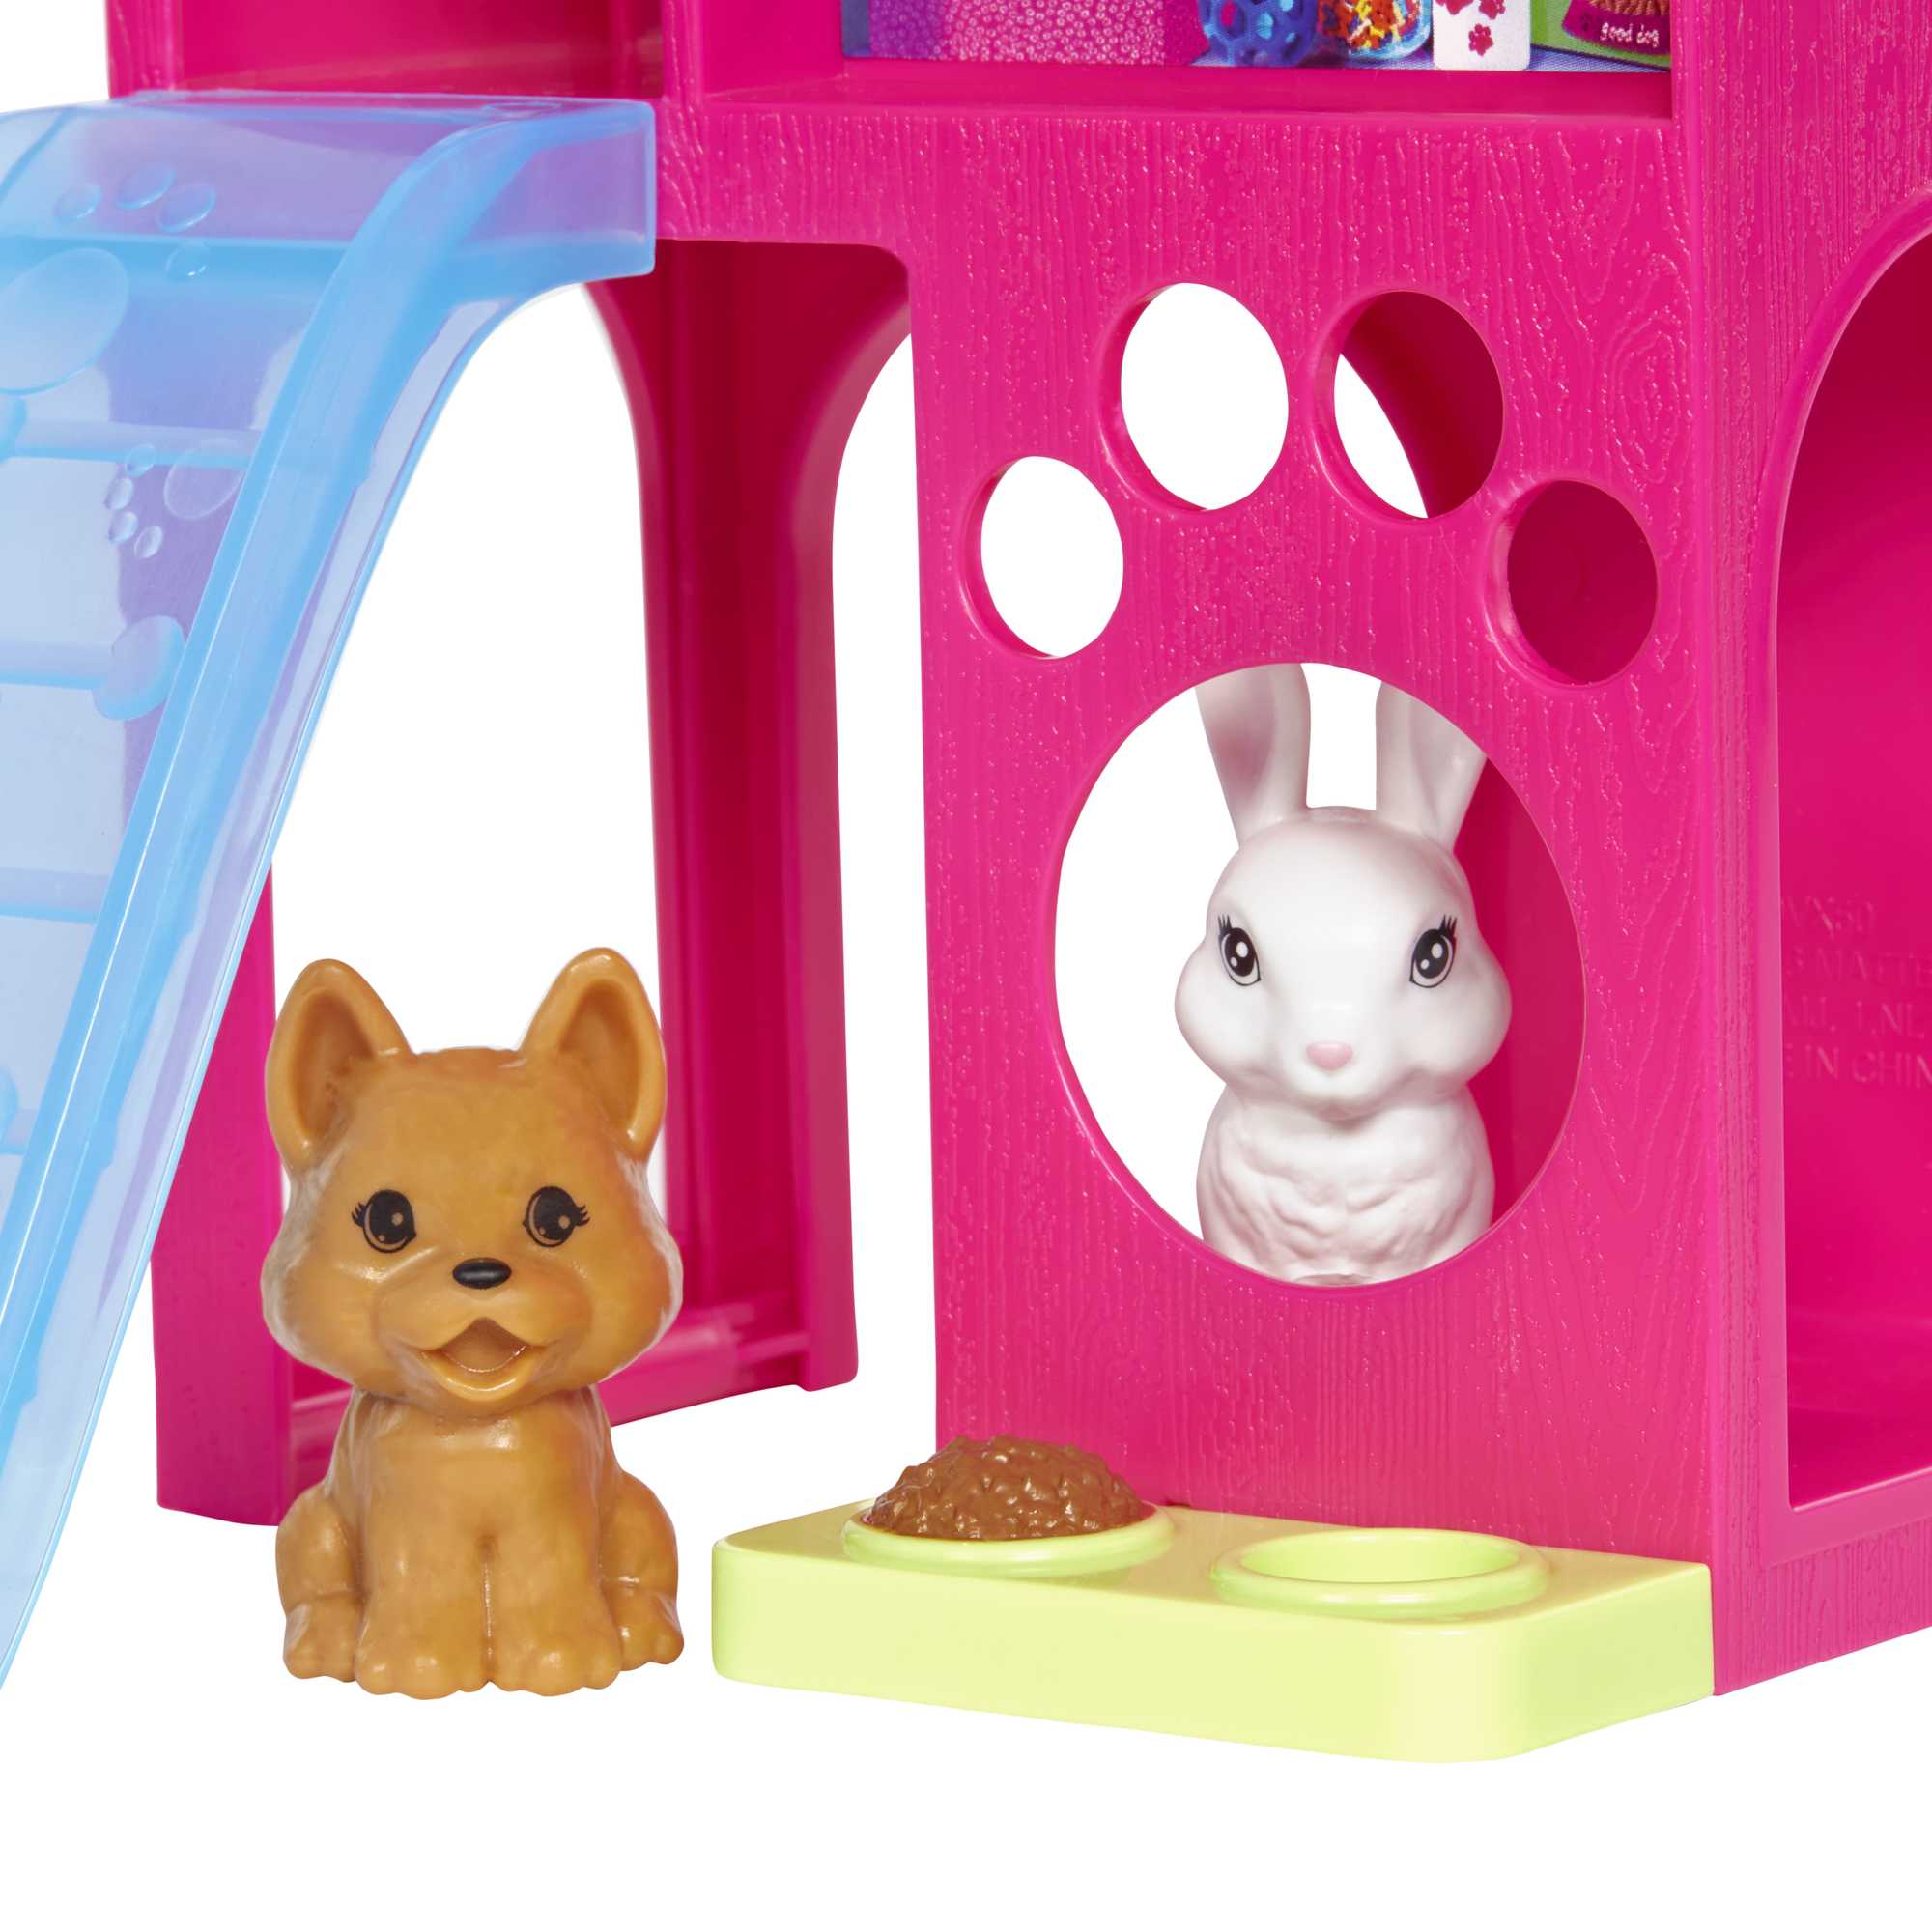 Barbie Doll With Playhouse Playset by Mattel -Mattel - India - www.superherotoystore.com